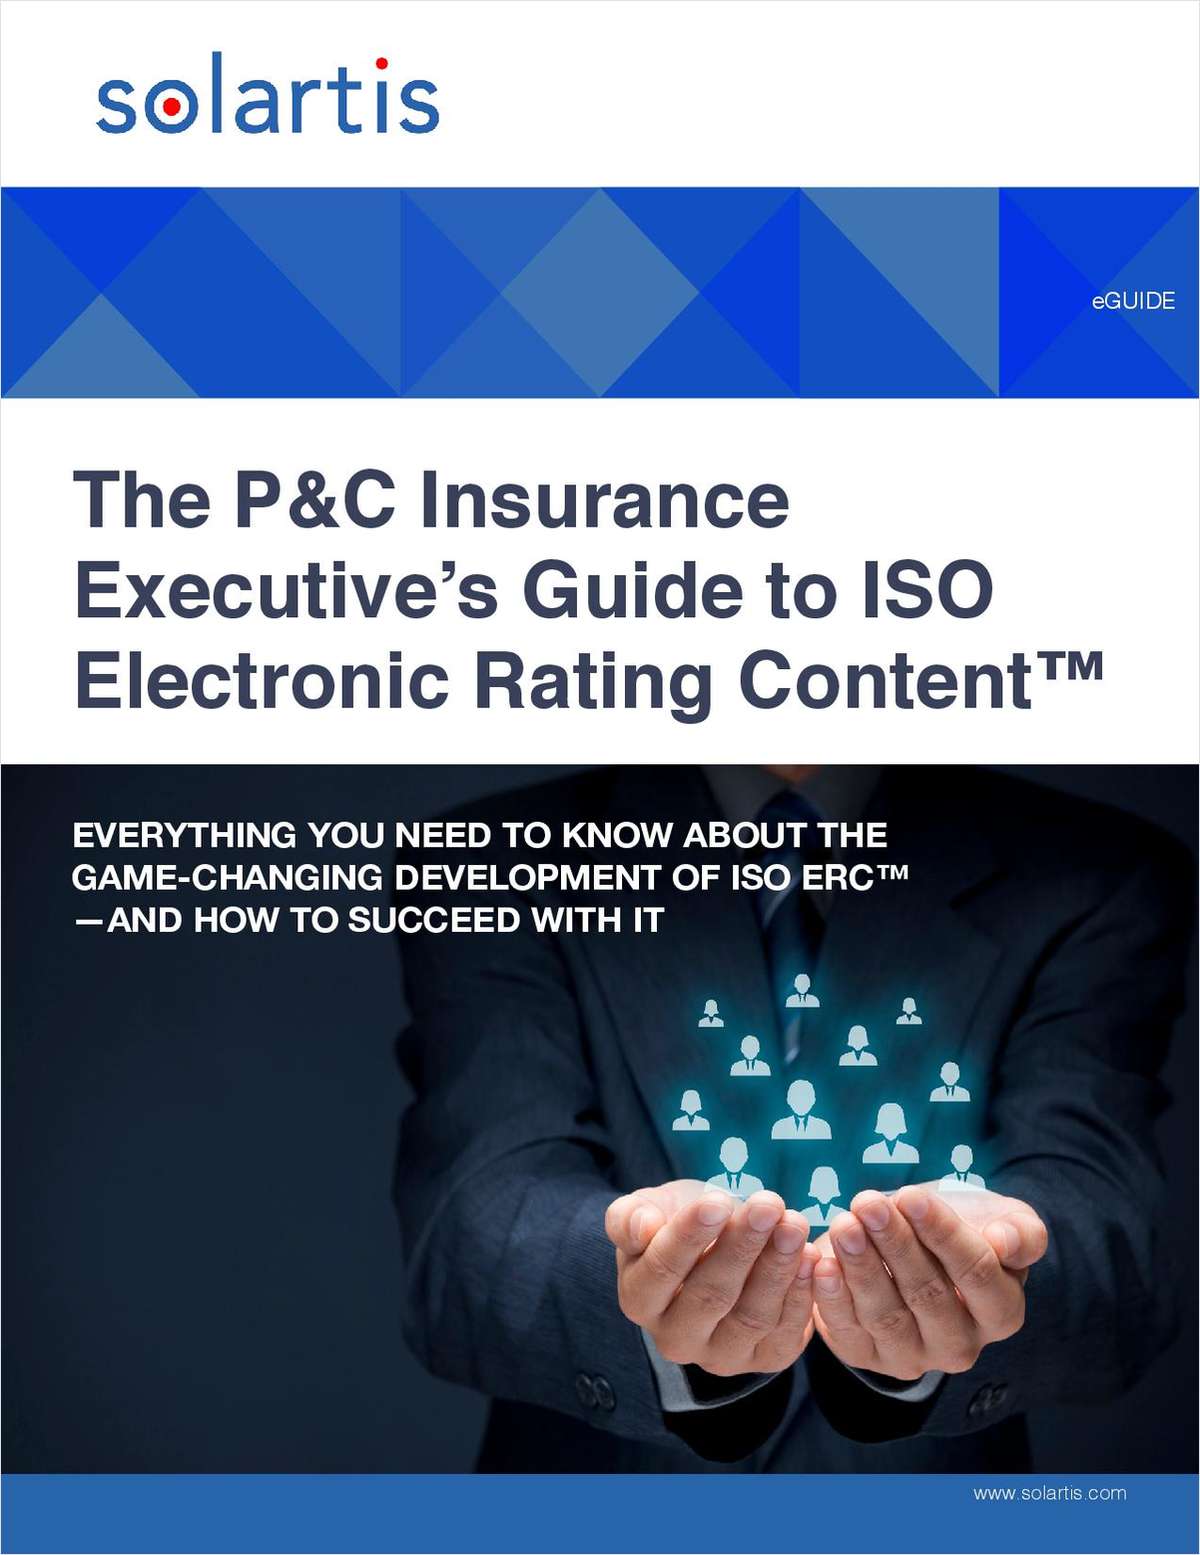 The P&C Insurance Executive's Guide to ISO Electronic Rating Content™